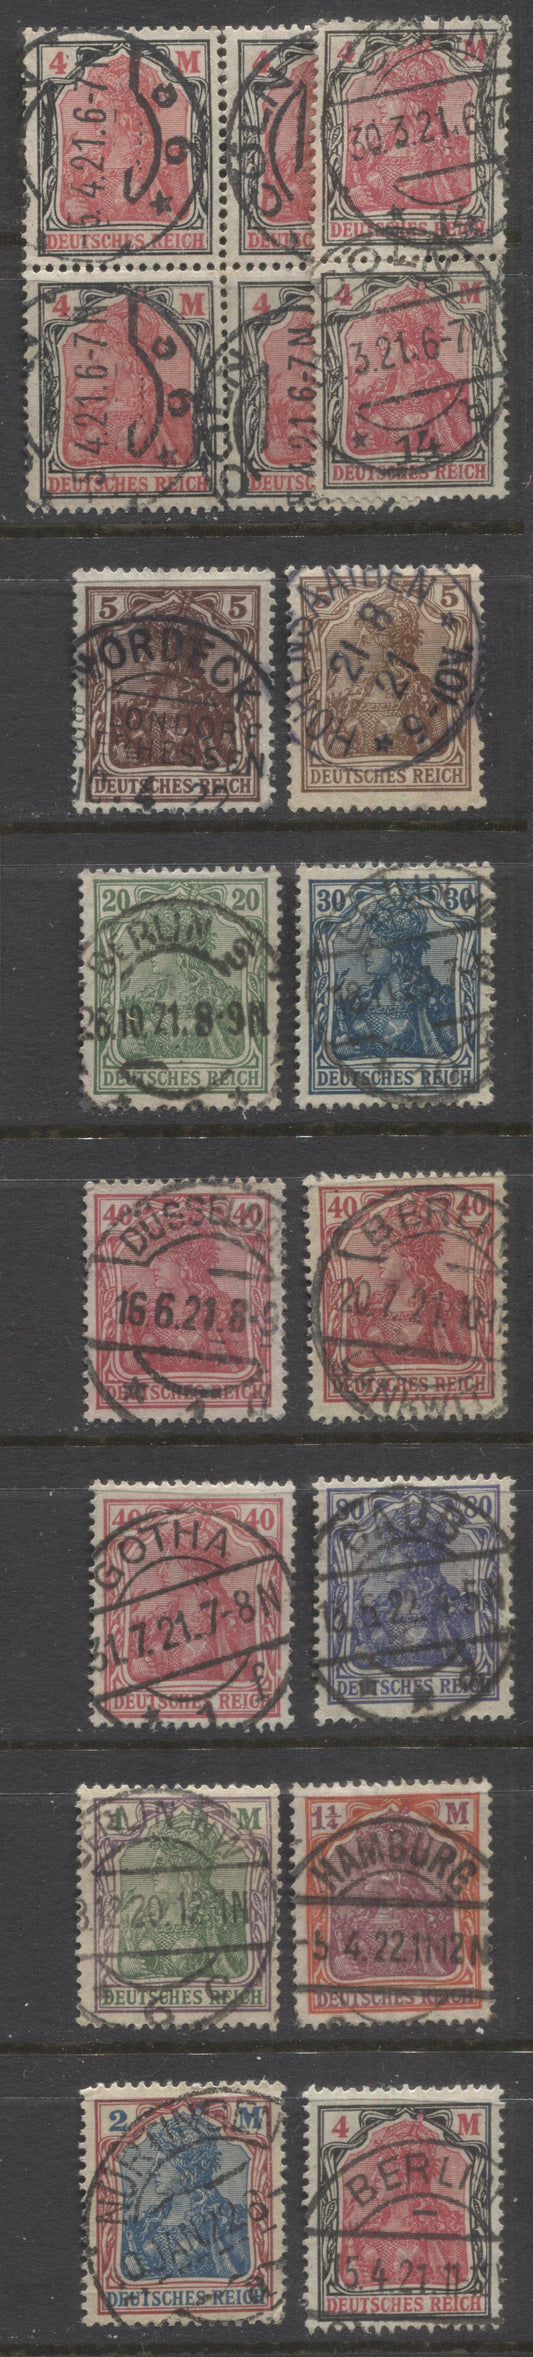 Lot 440 Germany SC#118/132 1920 Inflation Period Germania Issue, All With SON Town Cancels, 12 Fine & VF Used Singles, Pair, & Block of 4, Click on Listing to See ALL Pictures, Estimated Value $30